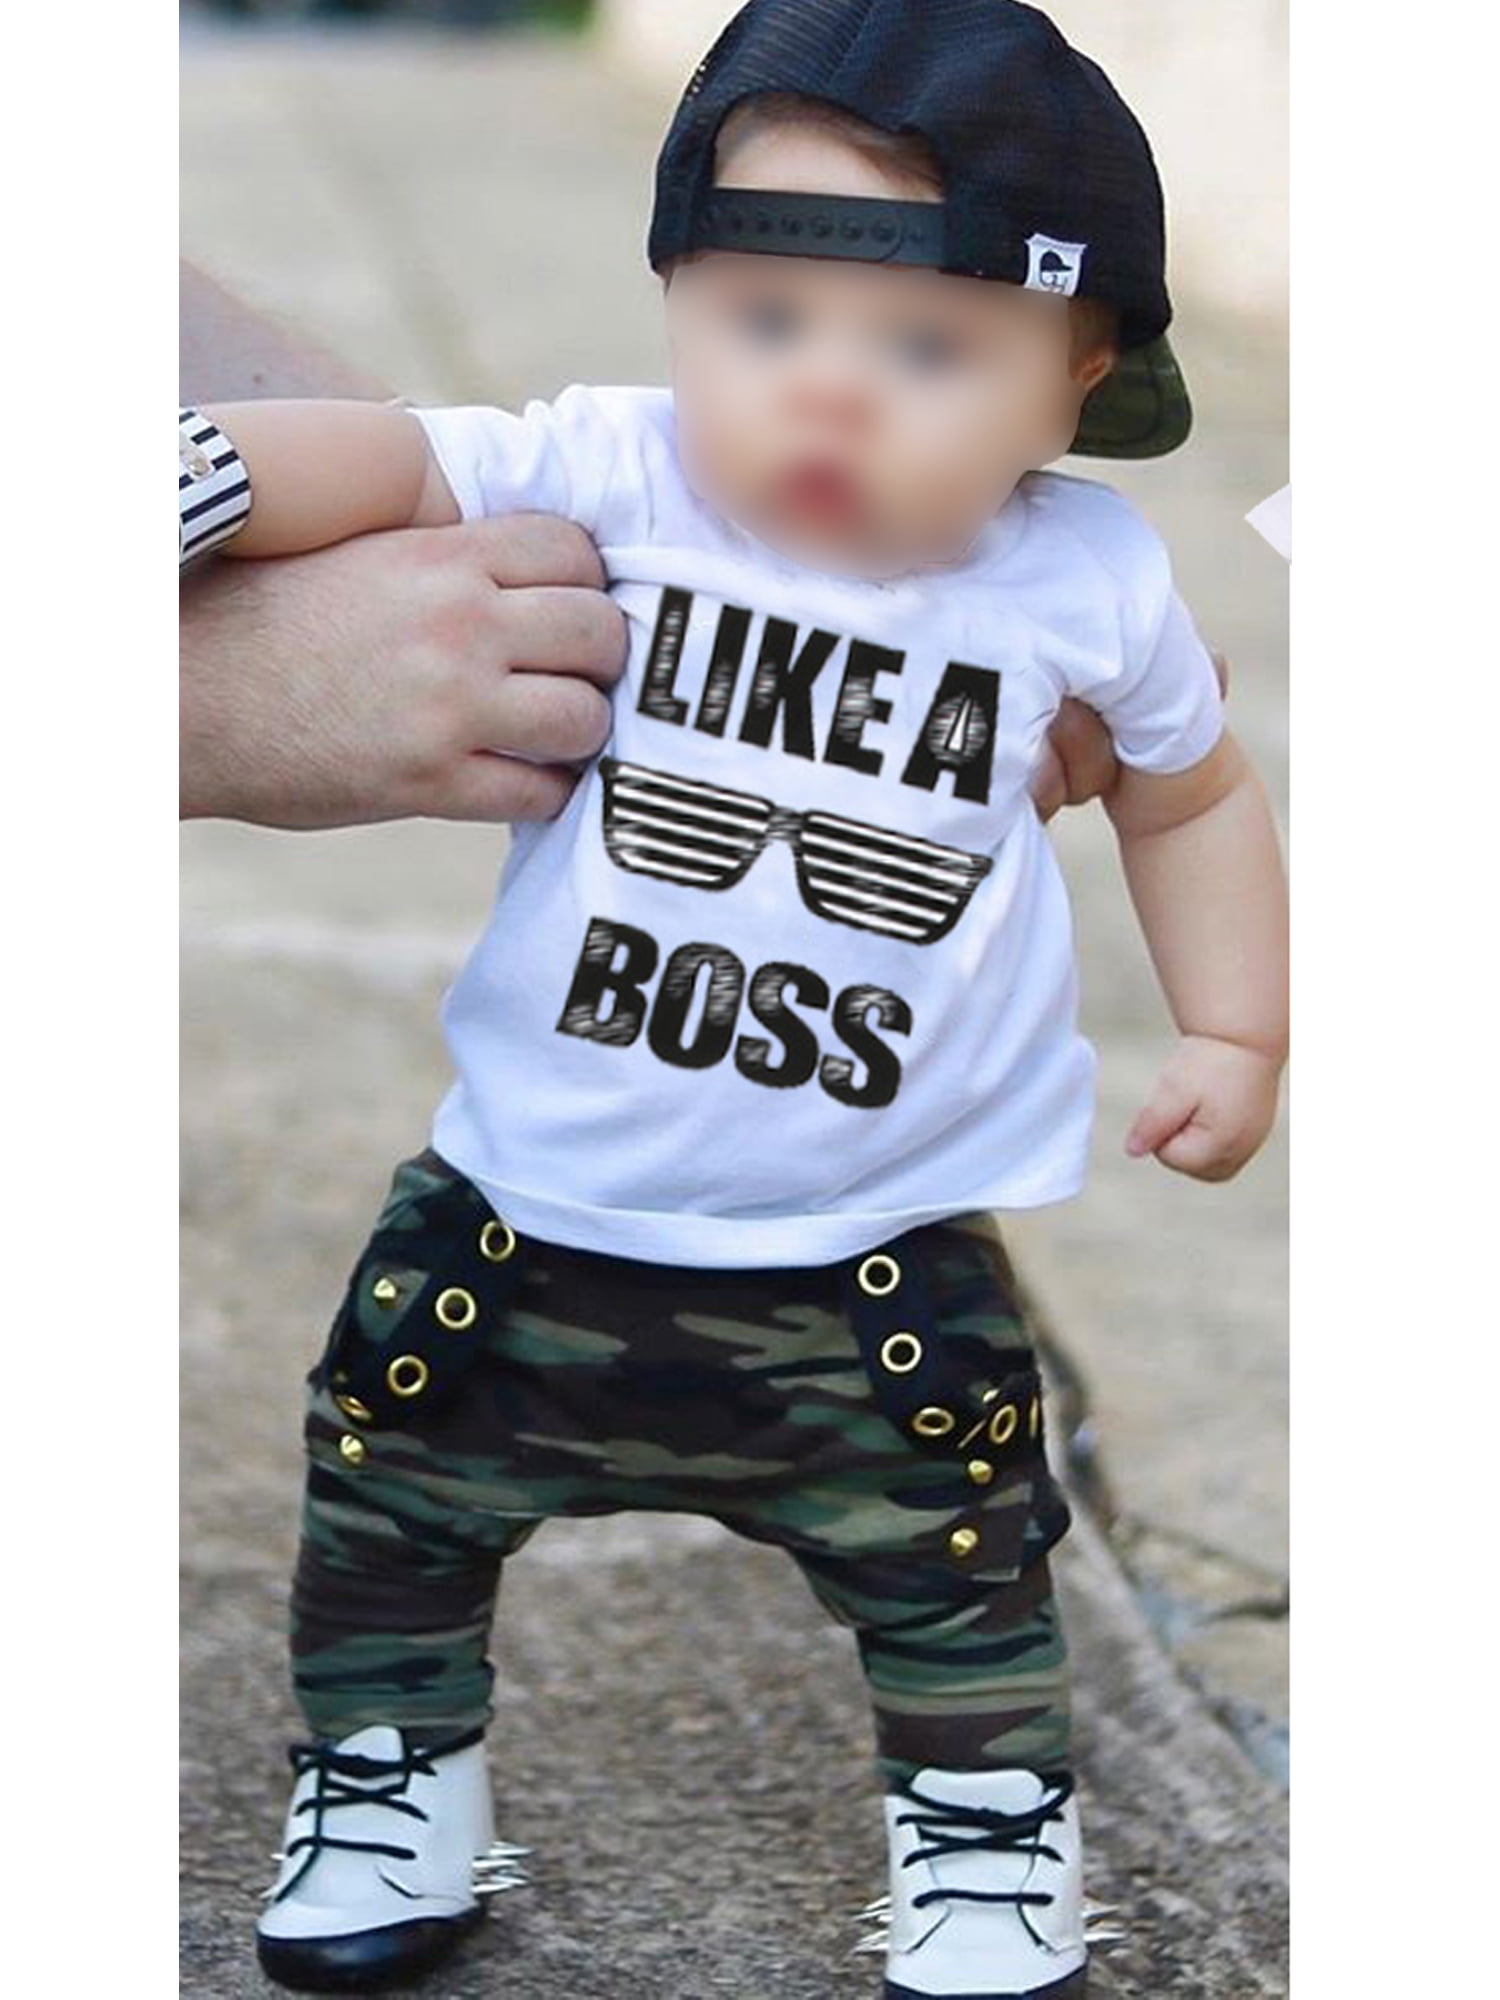 Frecoccialo Toddler Kids Baby Boy Cute Outfits Short Sleeve TShirt Top+Pants Clothes Set